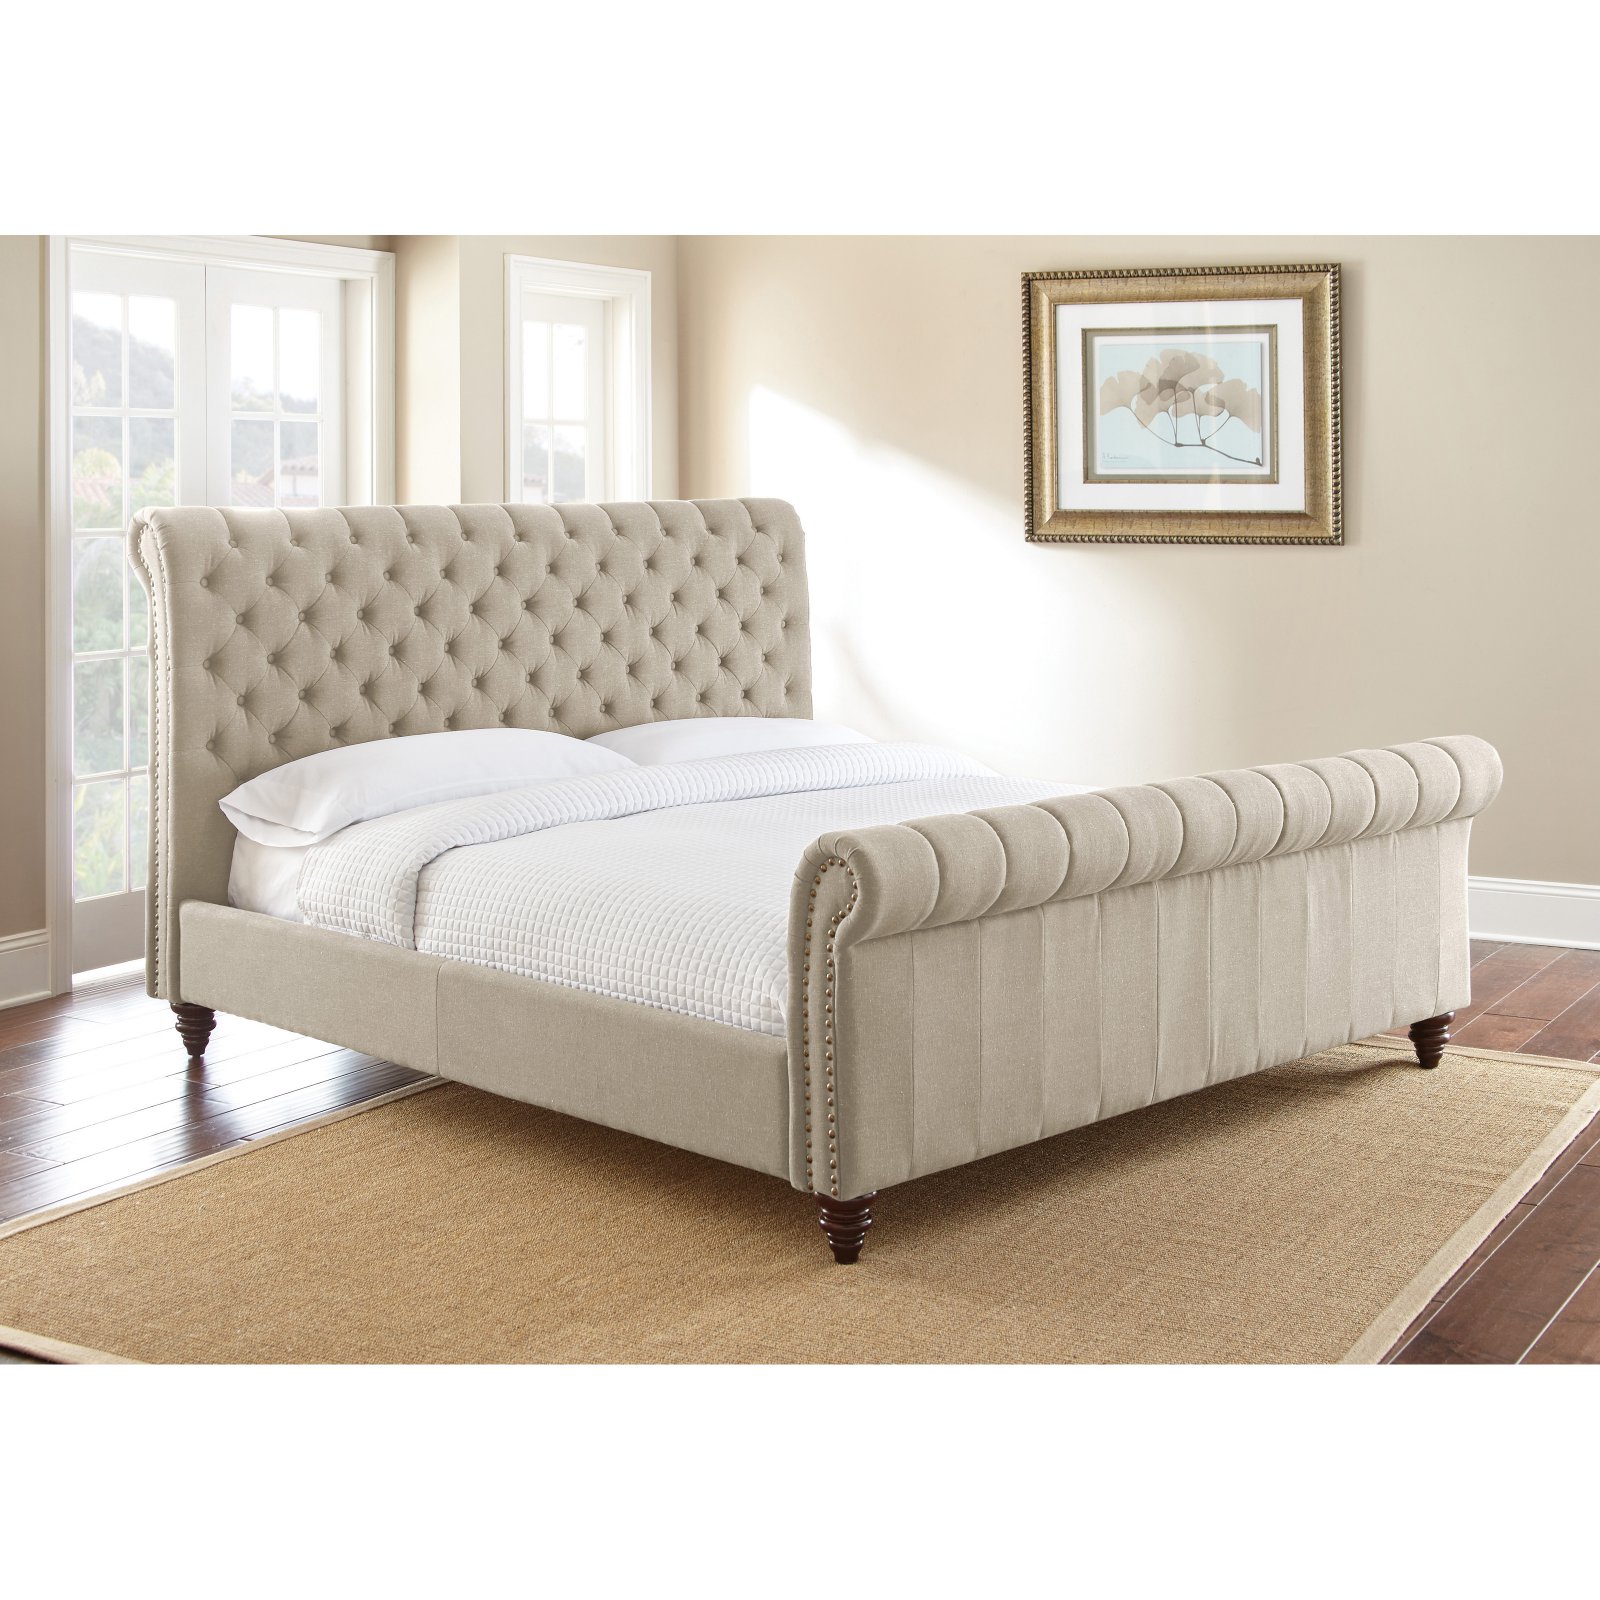 Swanson Tufted King Sleigh Bed in Sand Beige Upholstery - image 1 of 10